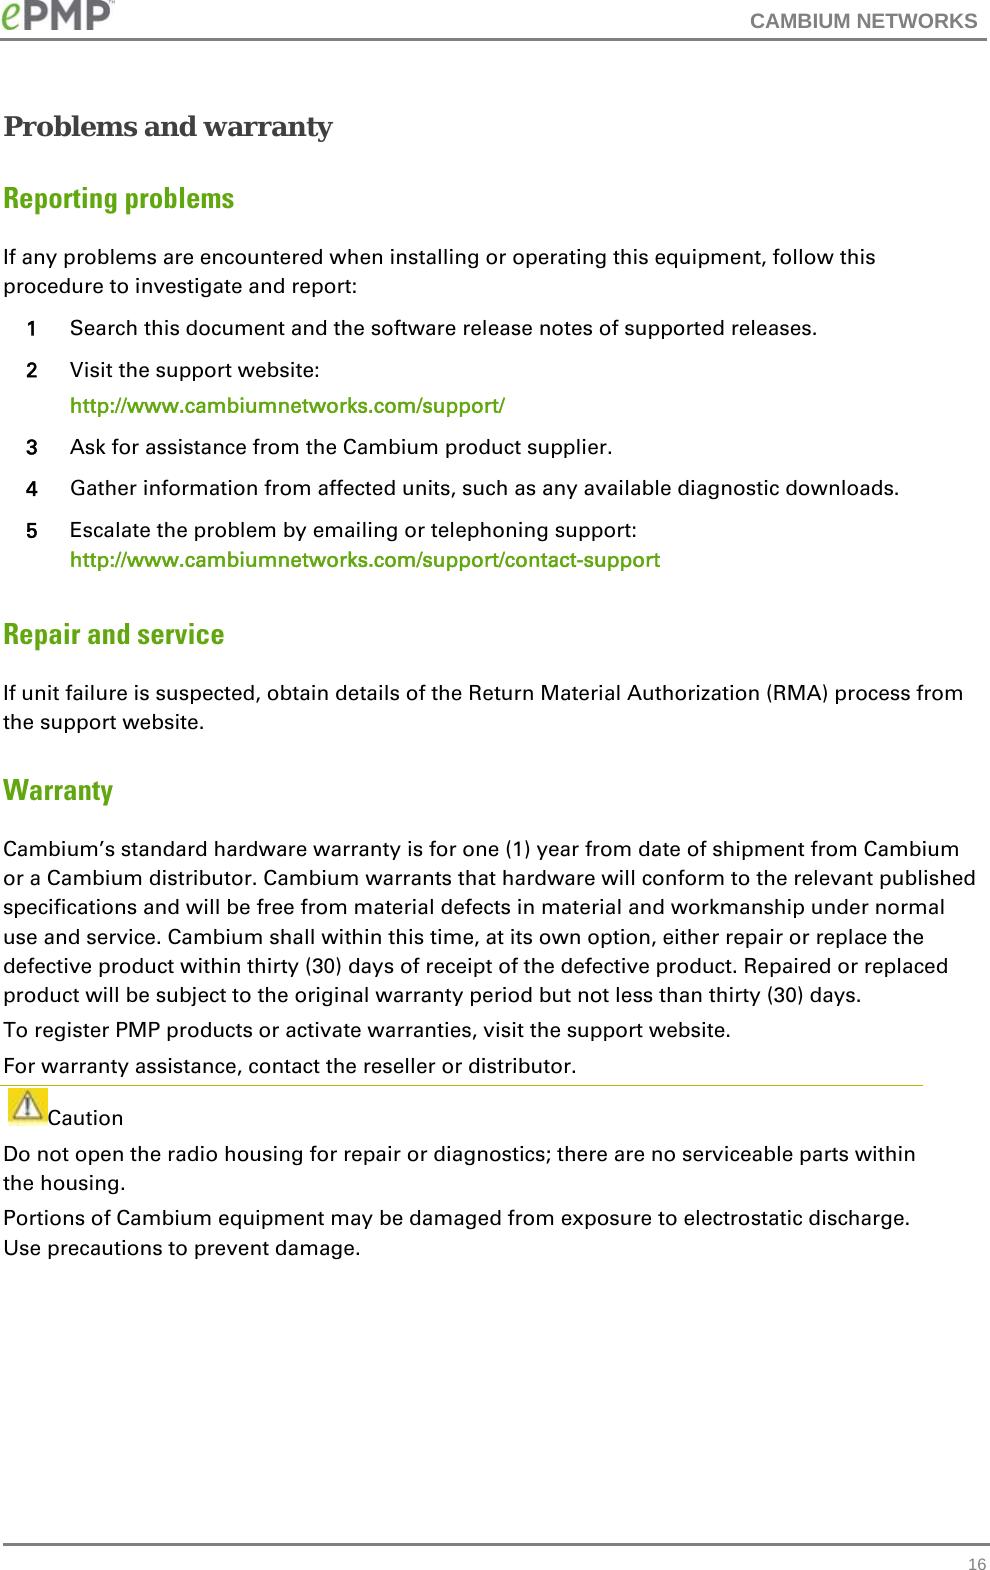 CAMBIUM NETWORKS   16Problems and warranty Reporting problems If any problems are encountered when installing or operating this equipment, follow this procedure to investigate and report: 1  Search this document and the software release notes of supported releases. 2  Visit the support website: http://www.cambiumnetworks.com/support/ 3  Ask for assistance from the Cambium product supplier. 4  Gather information from affected units, such as any available diagnostic downloads. 5  Escalate the problem by emailing or telephoning support: http://www.cambiumnetworks.com/support/contact-support Repair and service If unit failure is suspected, obtain details of the Return Material Authorization (RMA) process from the support website. Warranty Cambium’s standard hardware warranty is for one (1) year from date of shipment from Cambium or a Cambium distributor. Cambium warrants that hardware will conform to the relevant published specifications and will be free from material defects in material and workmanship under normal use and service. Cambium shall within this time, at its own option, either repair or replace the defective product within thirty (30) days of receipt of the defective product. Repaired or replaced product will be subject to the original warranty period but not less than thirty (30) days. To register PMP products or activate warranties, visit the support website. For warranty assistance, contact the reseller or distributor.  Caution Do not open the radio housing for repair or diagnostics; there are no serviceable parts within the housing. Portions of Cambium equipment may be damaged from exposure to electrostatic discharge. Use precautions to prevent damage.   